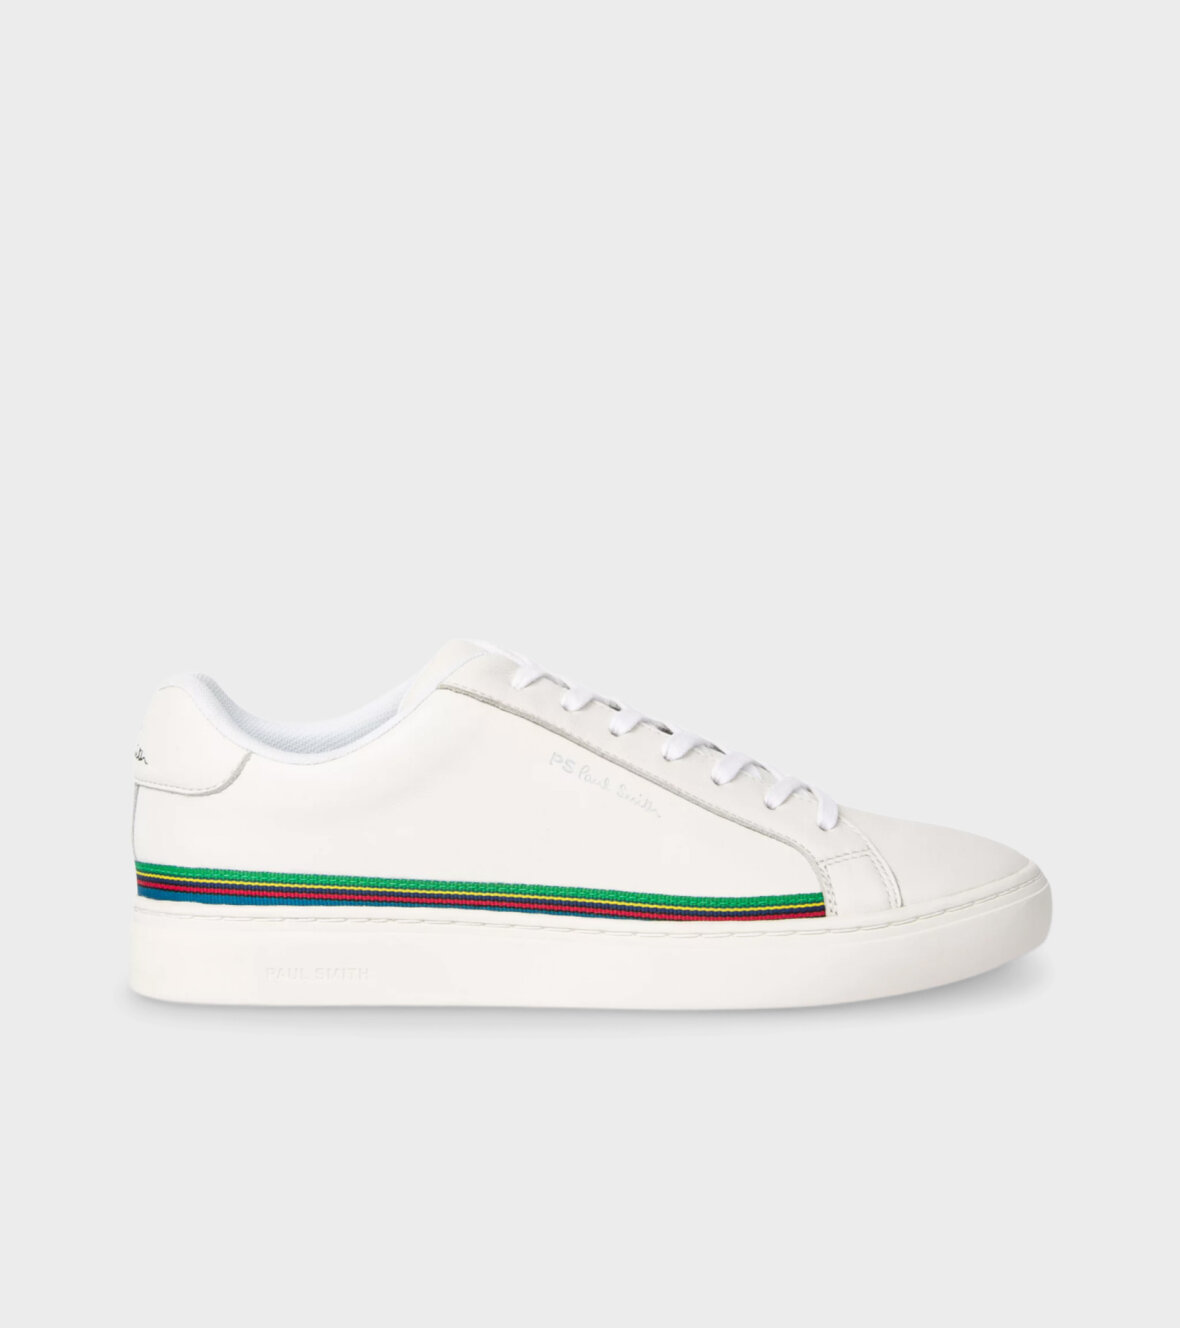 et eller andet sted Blive Overdreven dr. Adams - Paul Smith Rex Leather Sneakers White